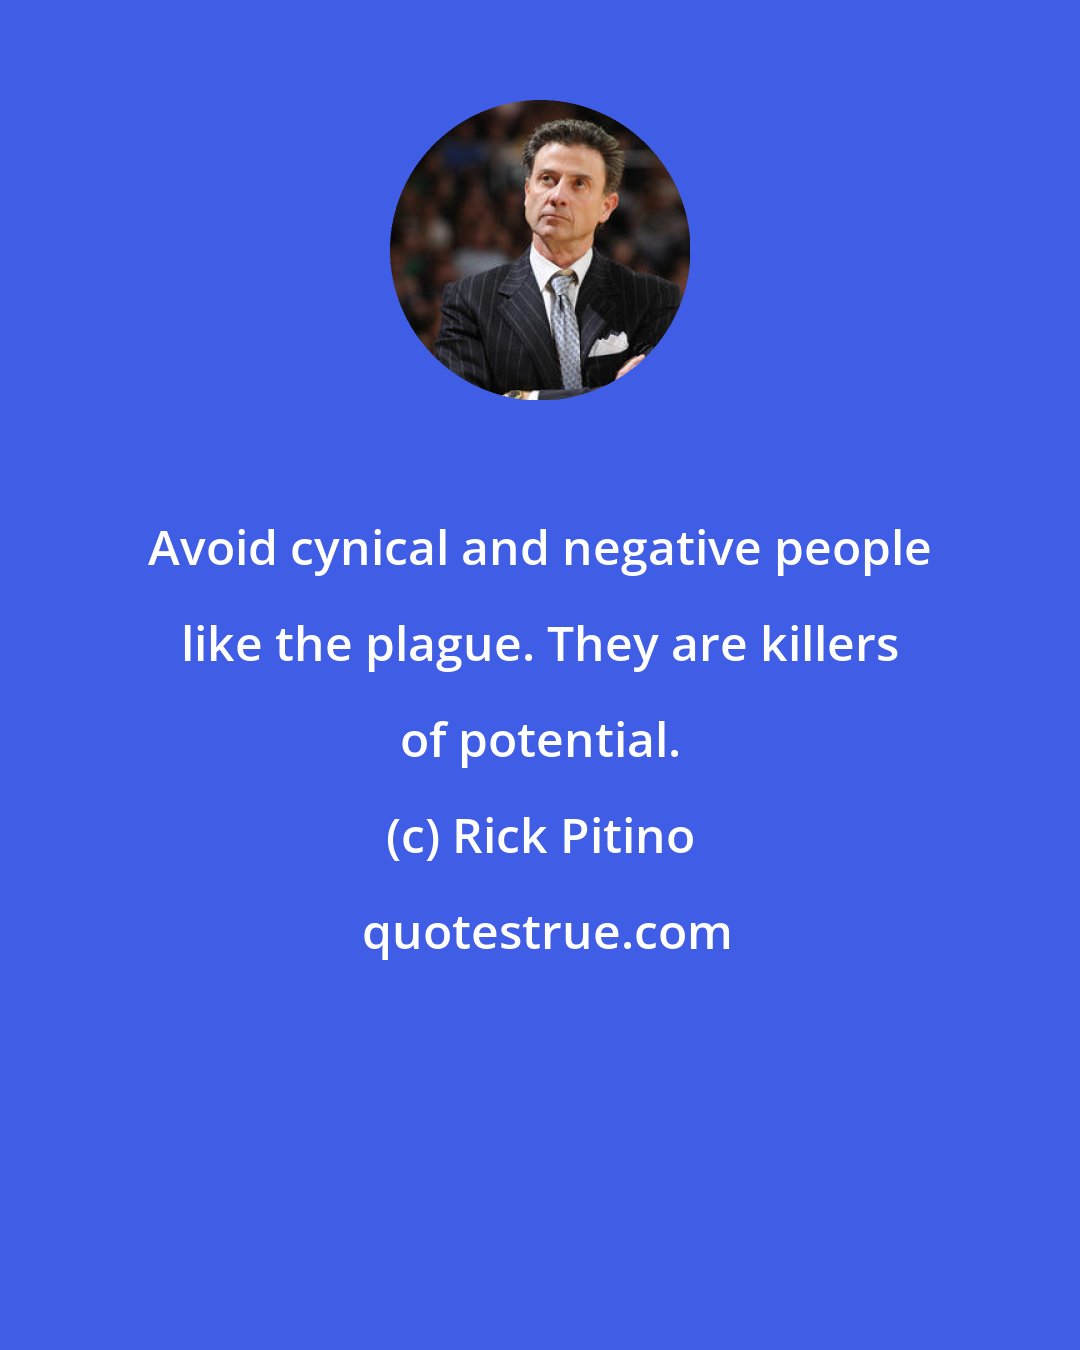 Rick Pitino: Avoid cynical and negative people like the plague. They are killers of potential.